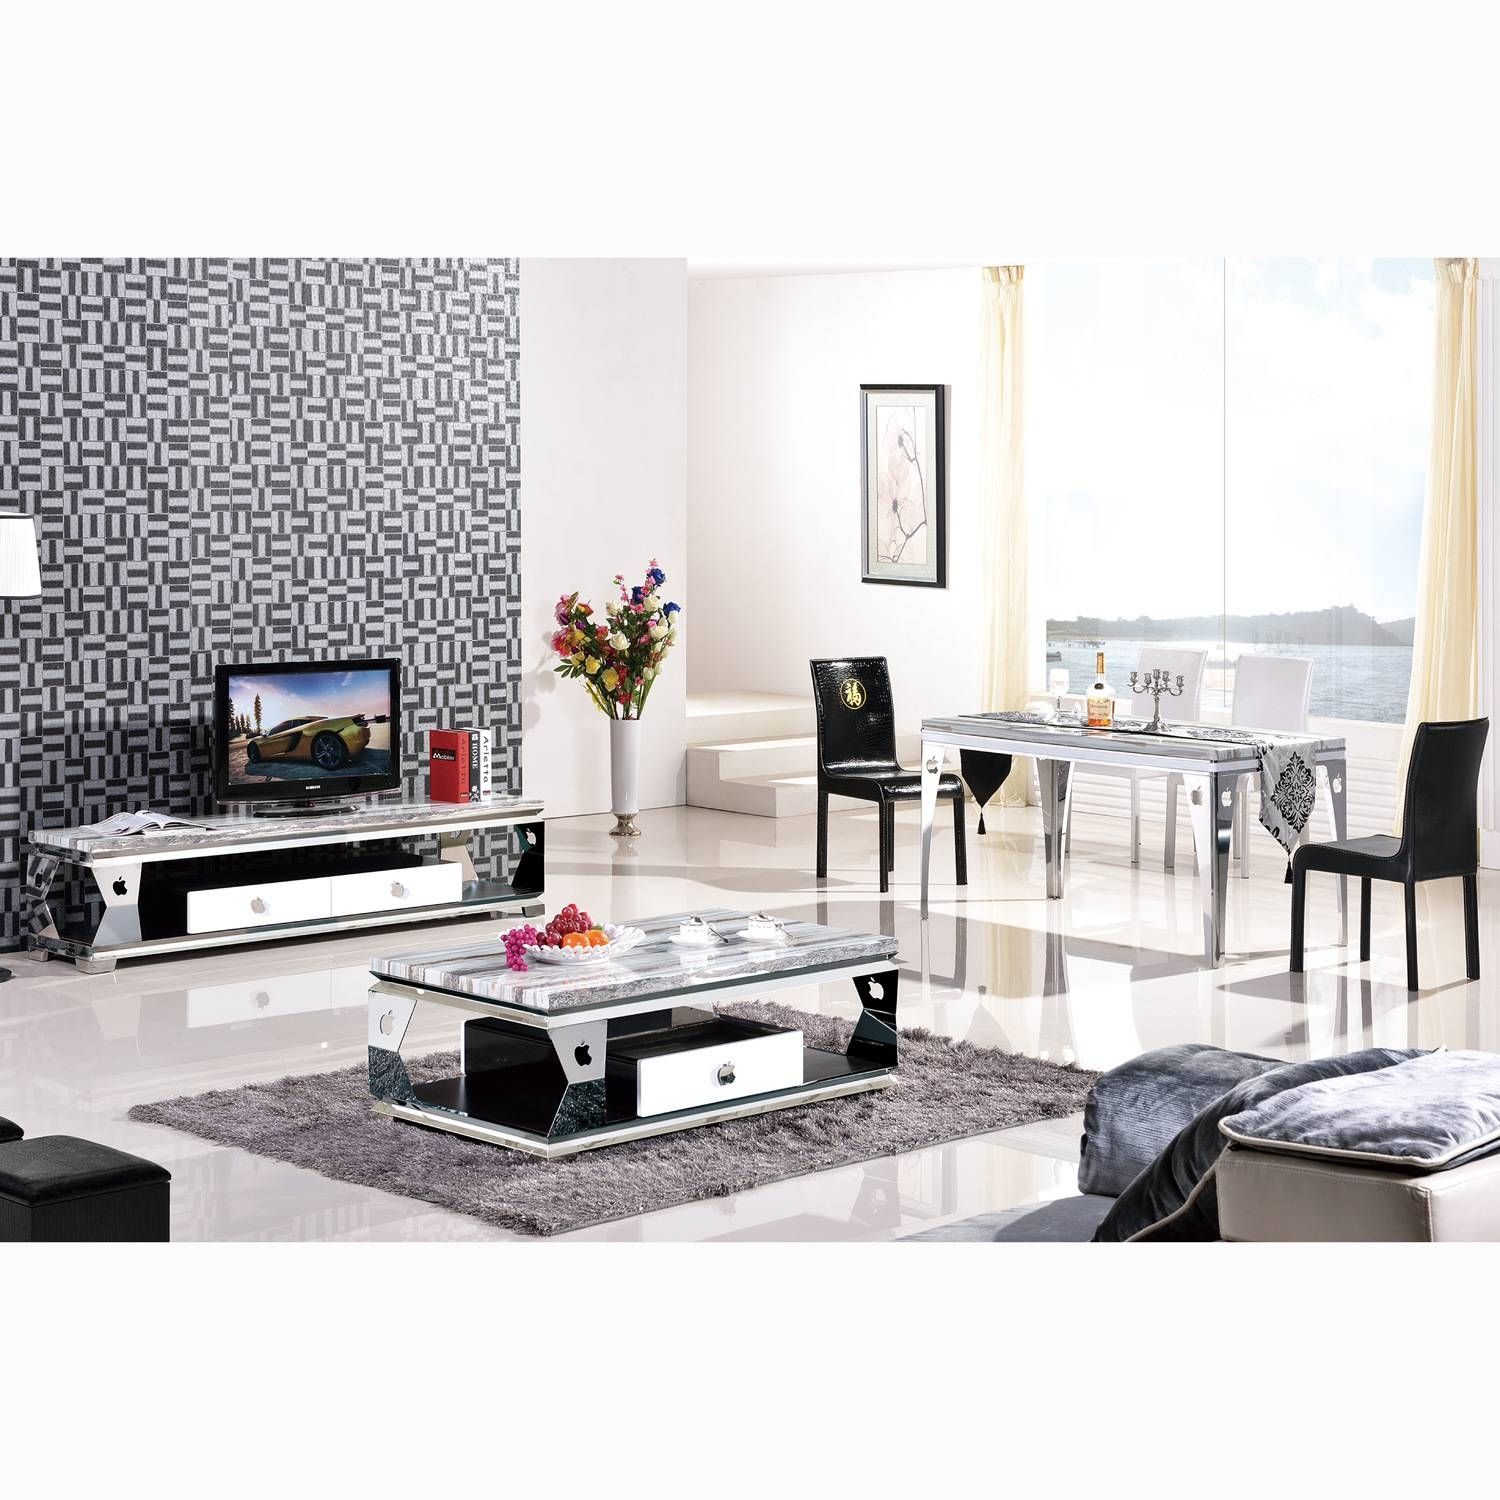 High Grade Stainless Steel Apple Tv Cabinet Marble Coffee Table Within Tv Cabinets And Coffee Table Sets (View 7 of 15)